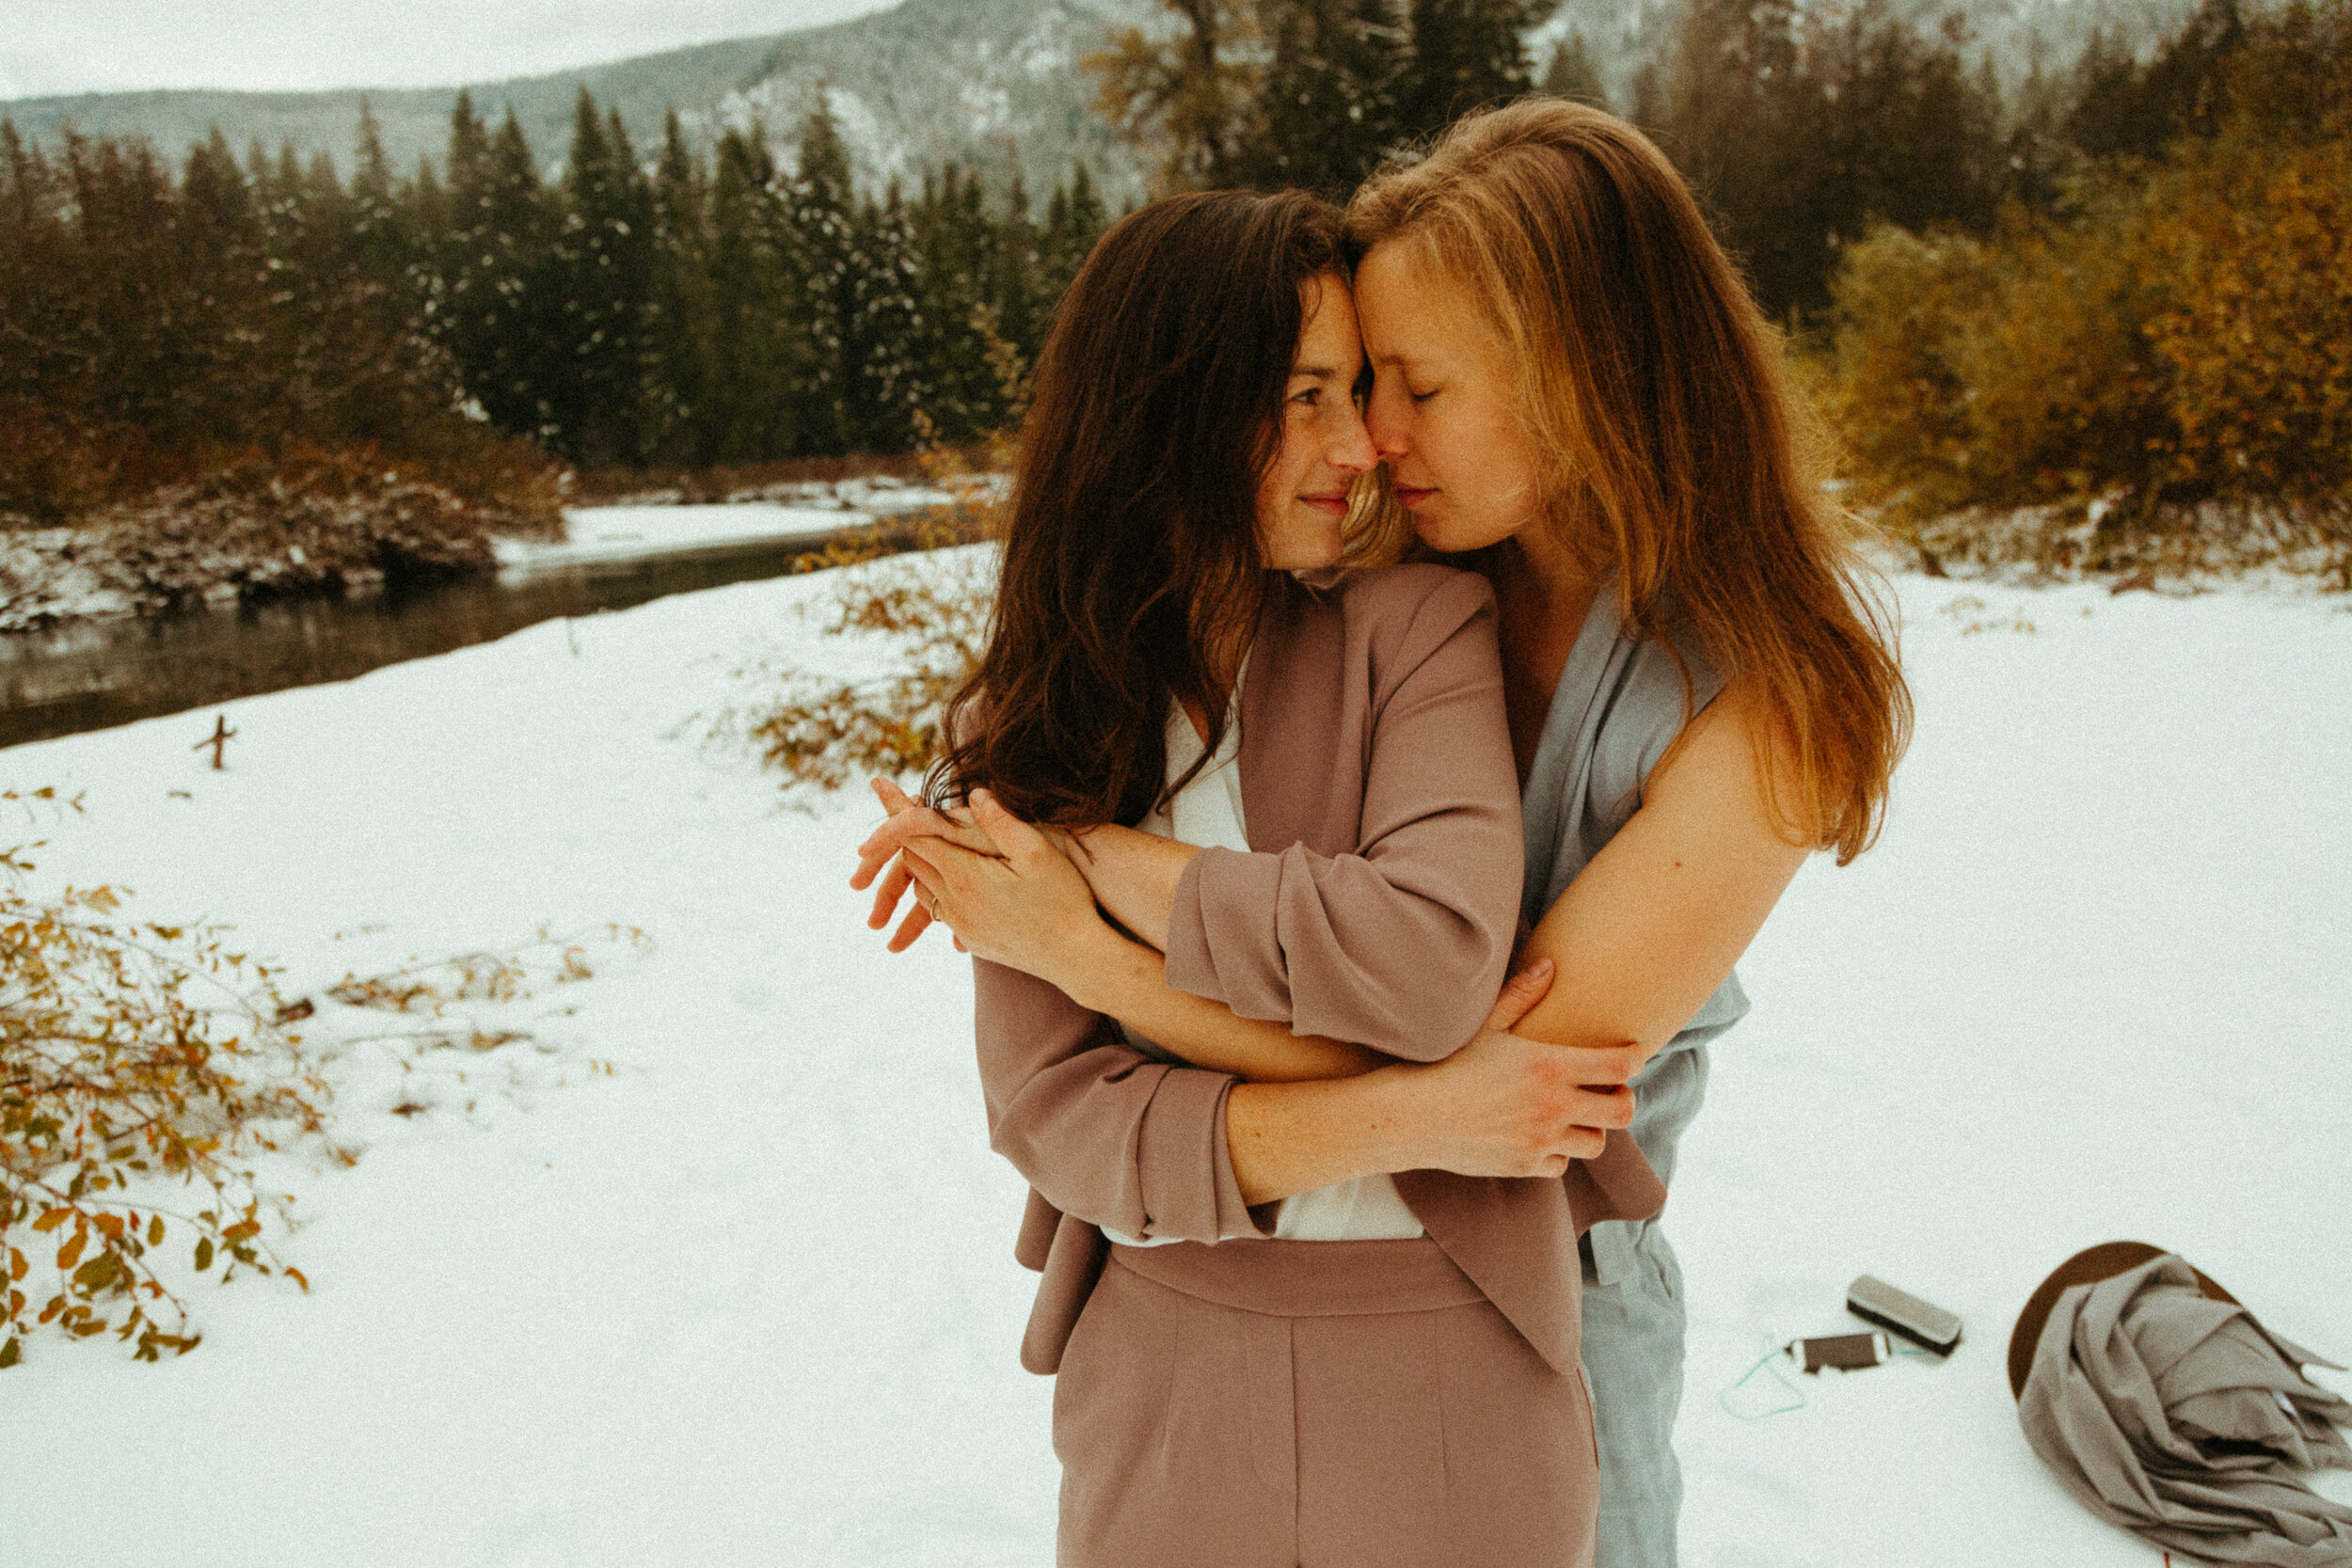 queer-gay-lesbian-trans-affirming-lgbtq-adventure-elopement-intimate-wedding-photographer-pnw-pacific-northwest-pnw-mountain-stream-forest-cowgay-tacoma-seattle-washington-portland-oregon-halle-roland-photography-non-binary-analog-film-artist-165-213.jpg